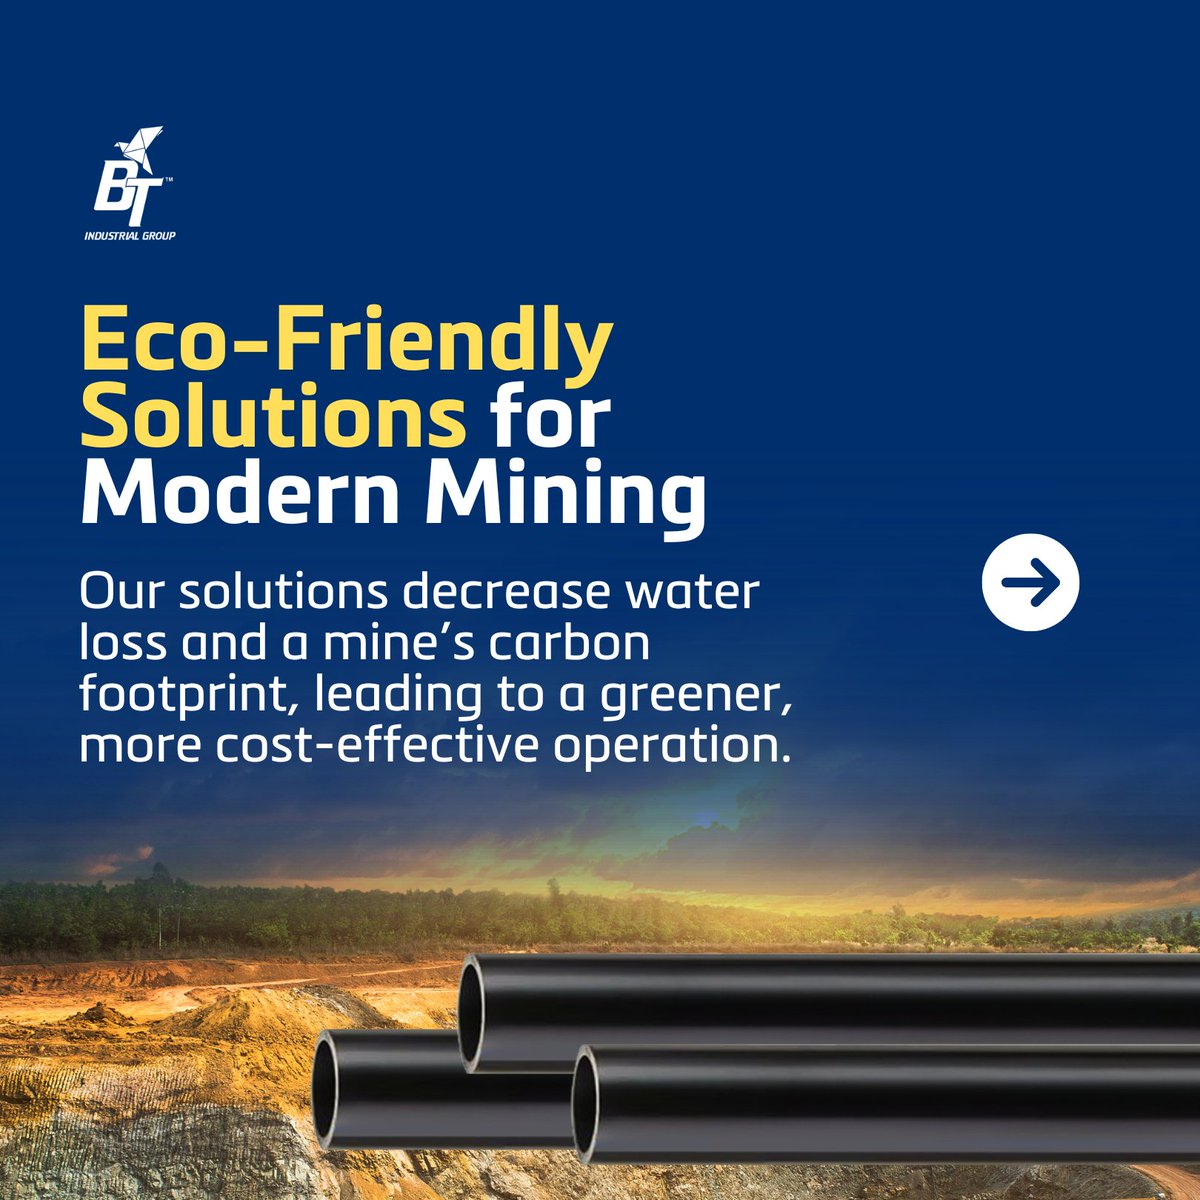 Swipe through the carousel to discover why BT Industrial stands as your ultimate partner in water resilience. Reach us at +27 (0) 10 109 1728 for any inquiries.  #BTIndustrial #SustainabilityInAction #ESGExcellence #EfficiencyFirst #pipes #pipessupplier #WaterSolution